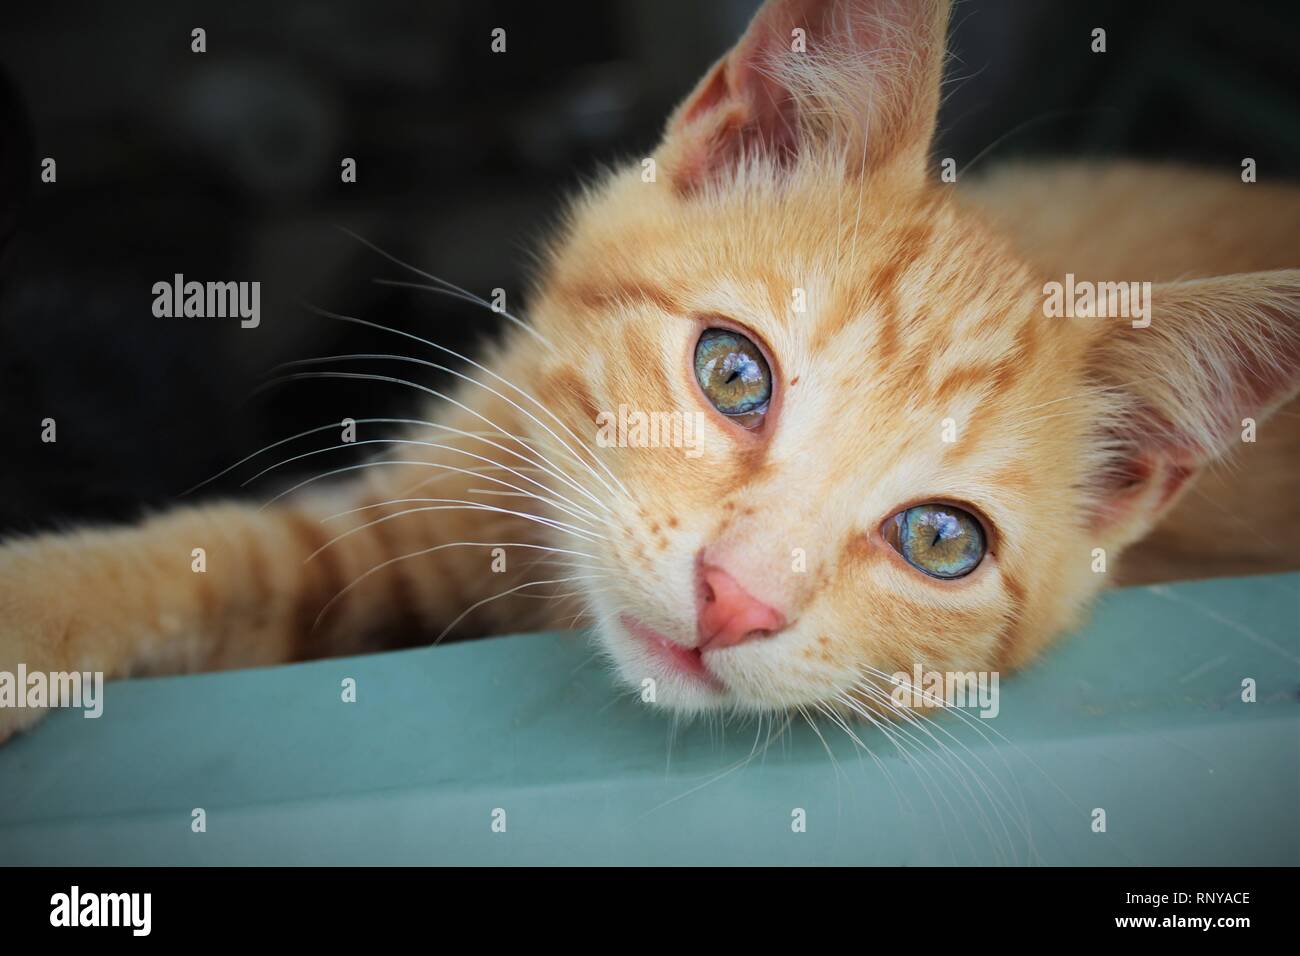 Orange male cat with blue eyes on a blue piece of metal. Stock Photo